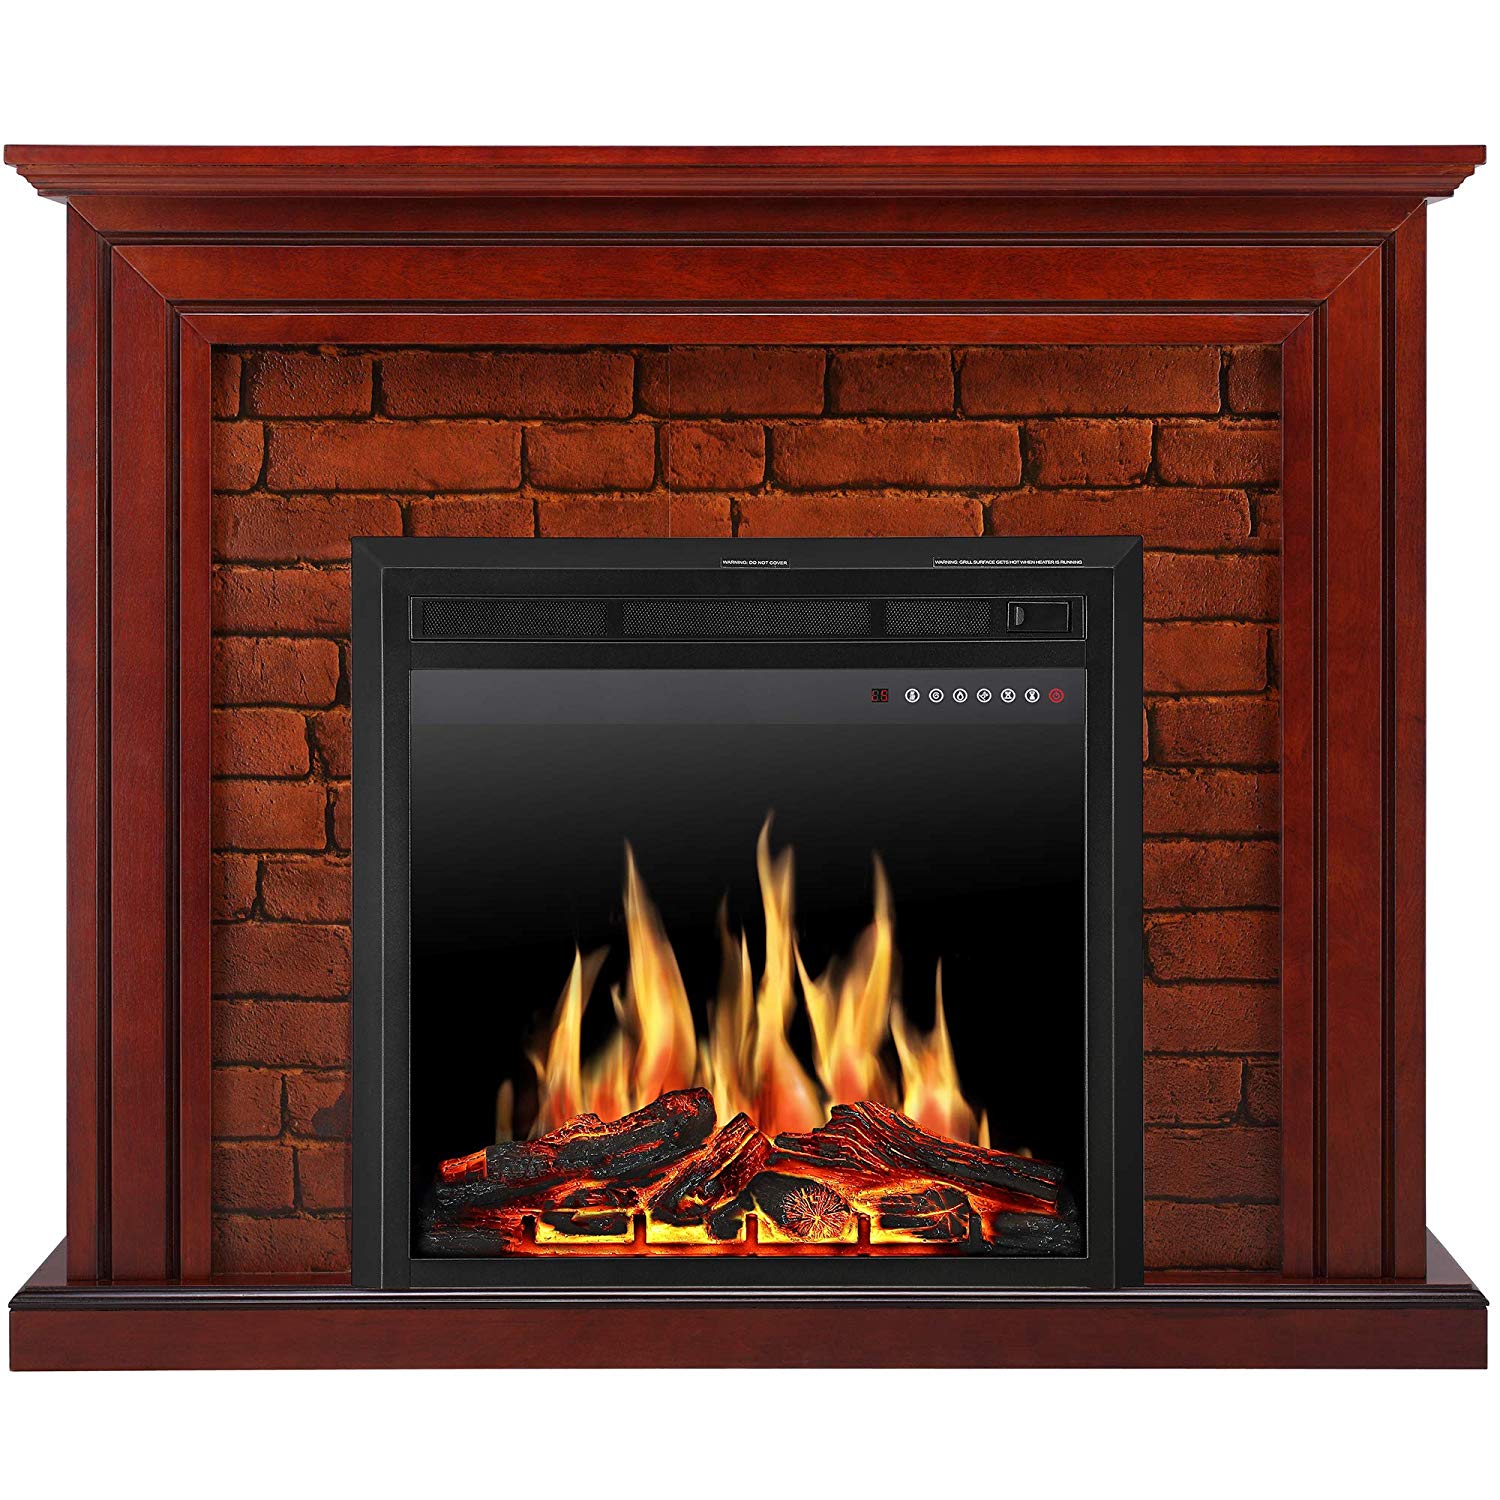 Fireplace Heater Tv Stand Fresh Jamfly Electric Fireplace Mantel Package Traditional Brick Wall Design Heater with Remote Control and Led touch Screen Home Accent Furnishings